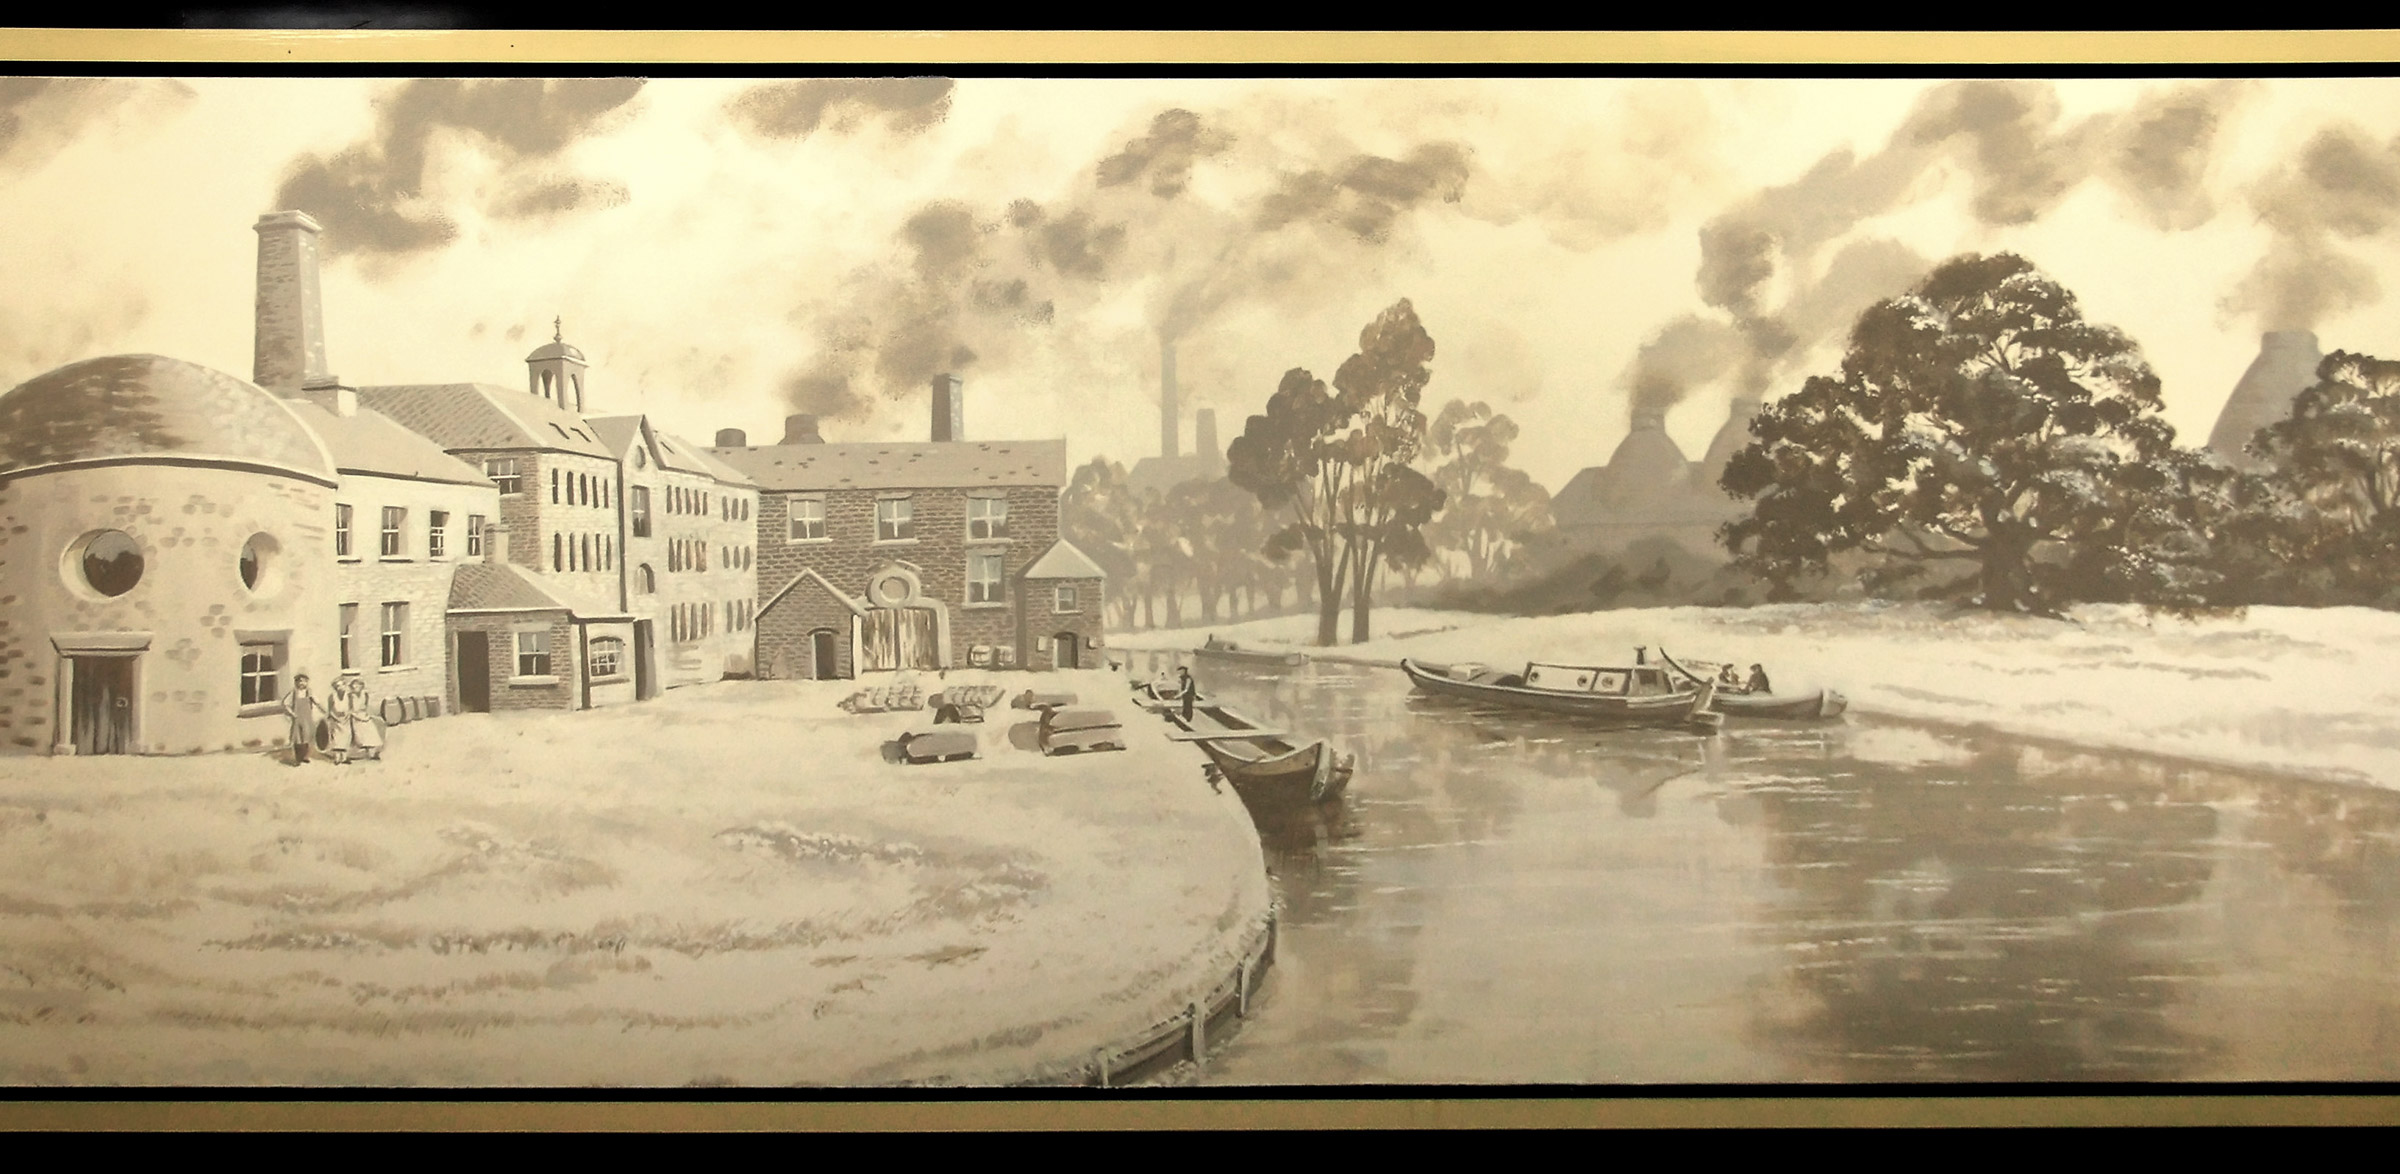 Artwork on narrow boat depicting the Wedgewood factory in its hayday